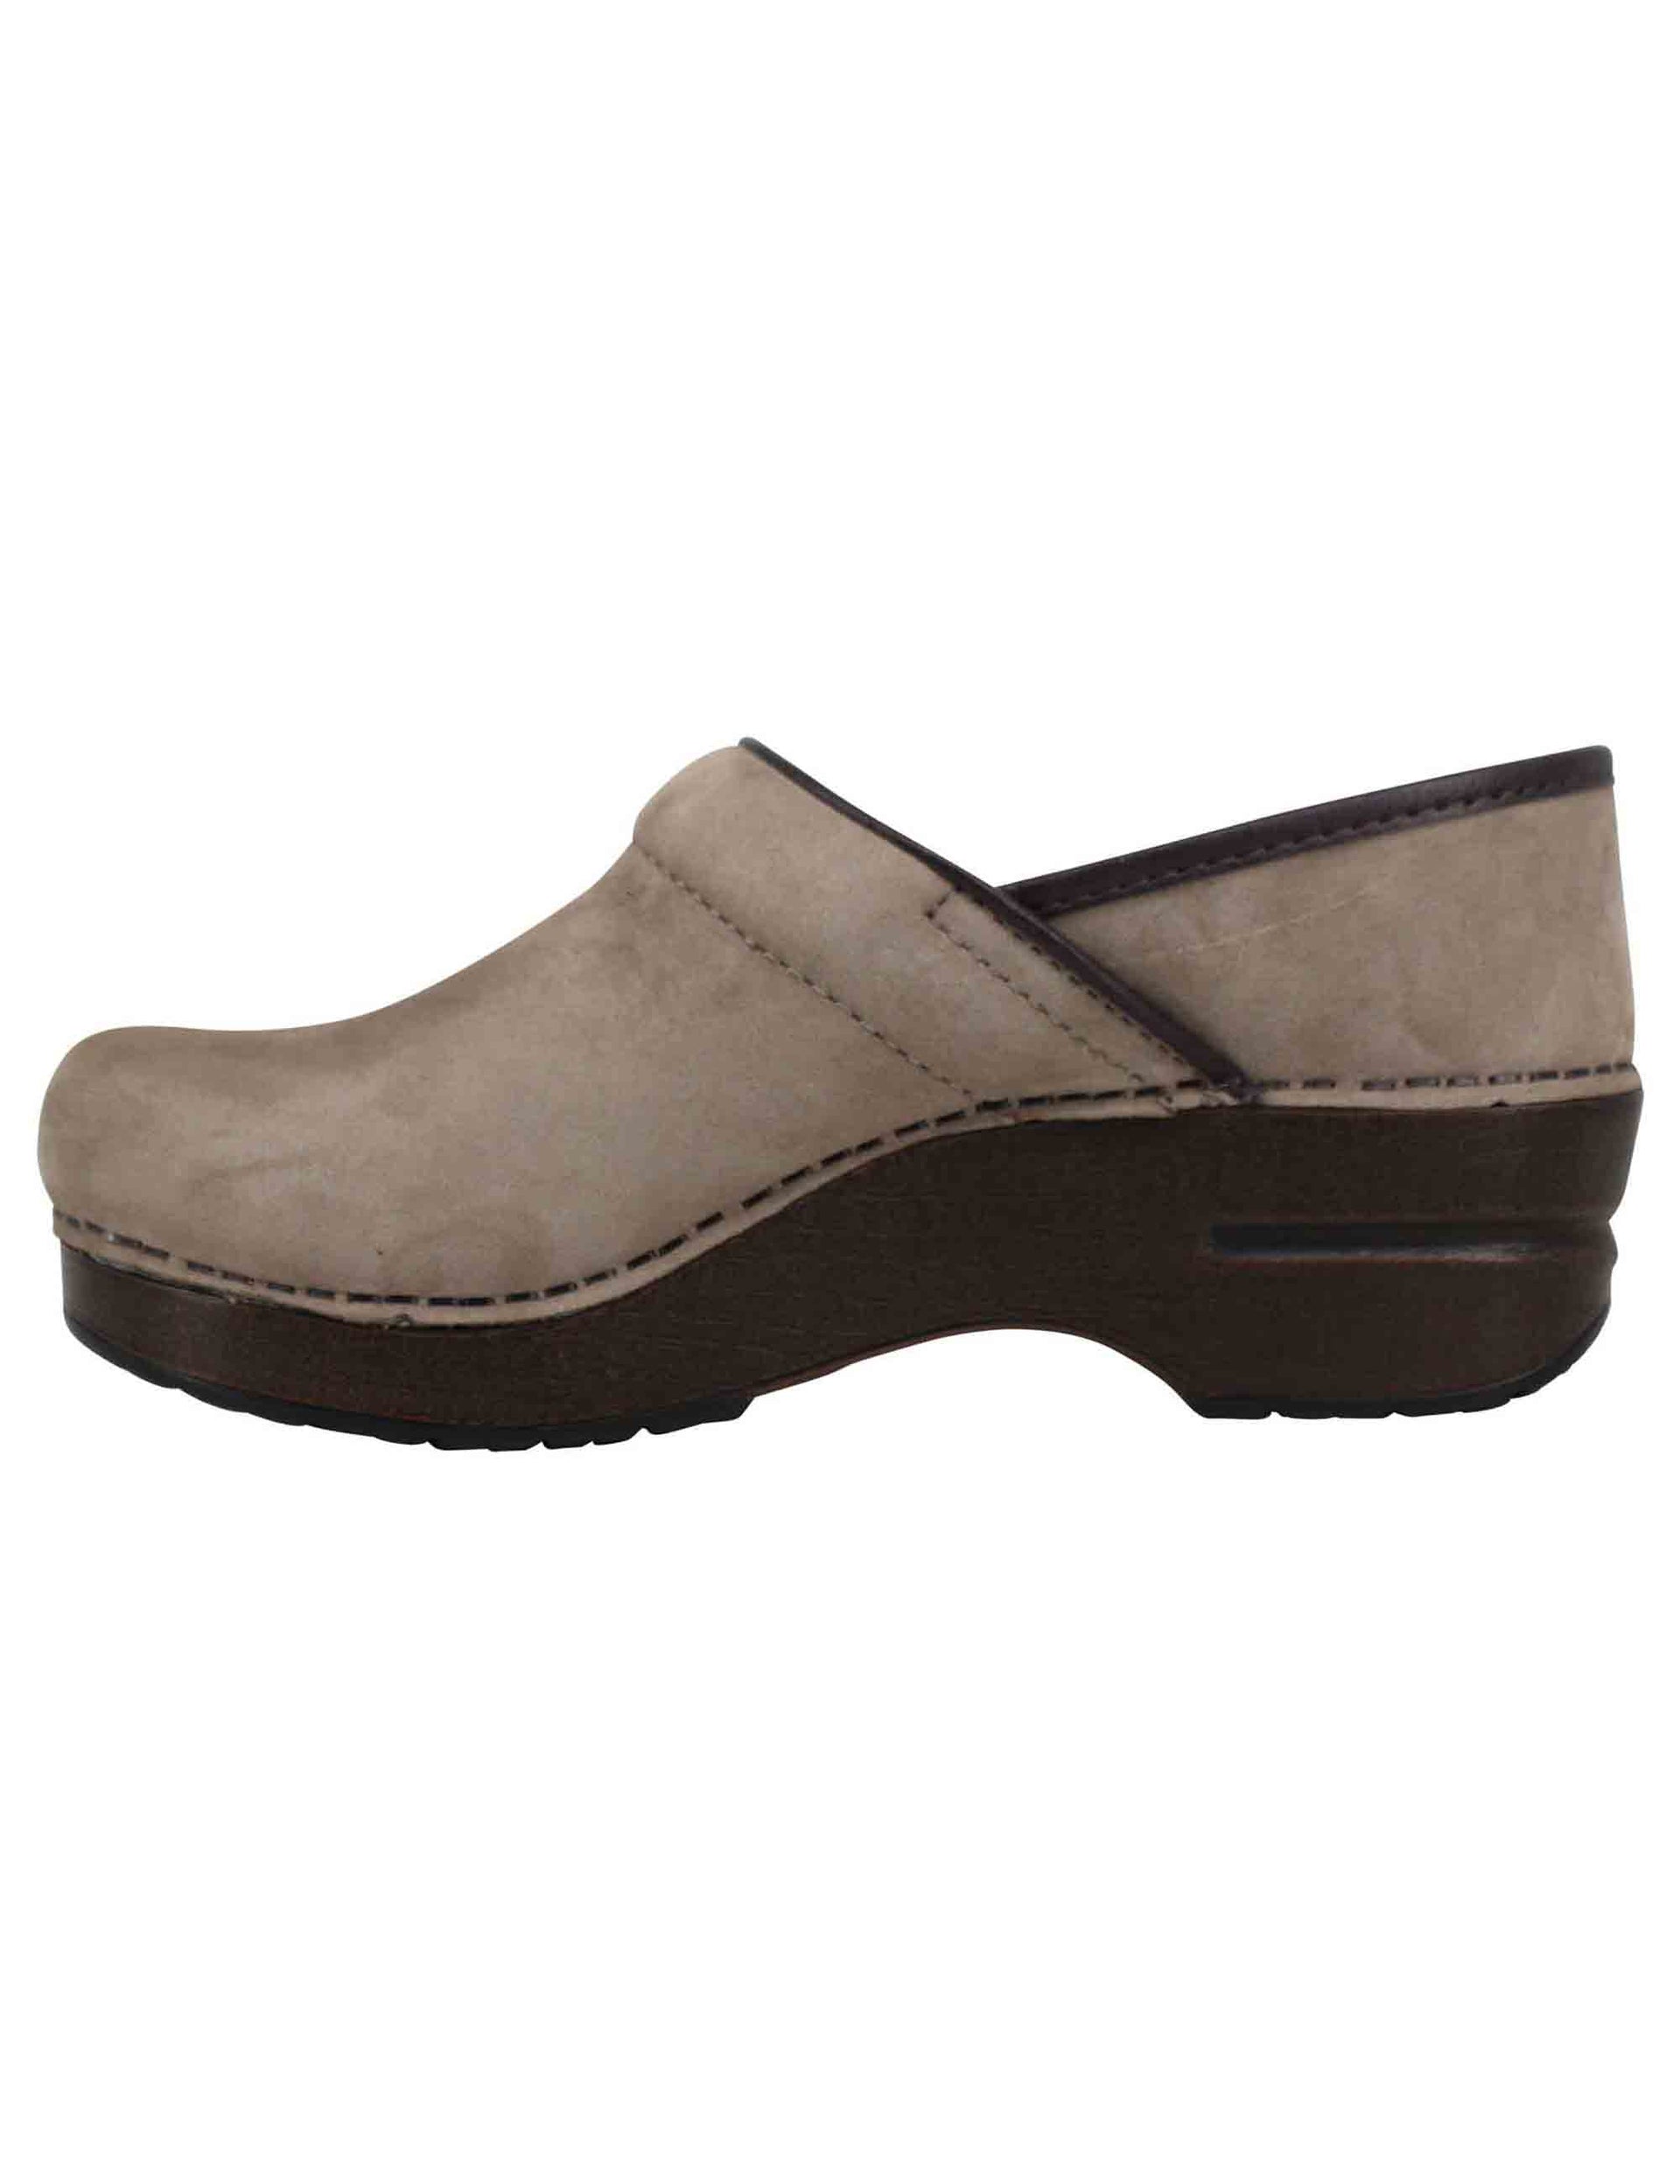 Professional women's clogs in taupe nubuck